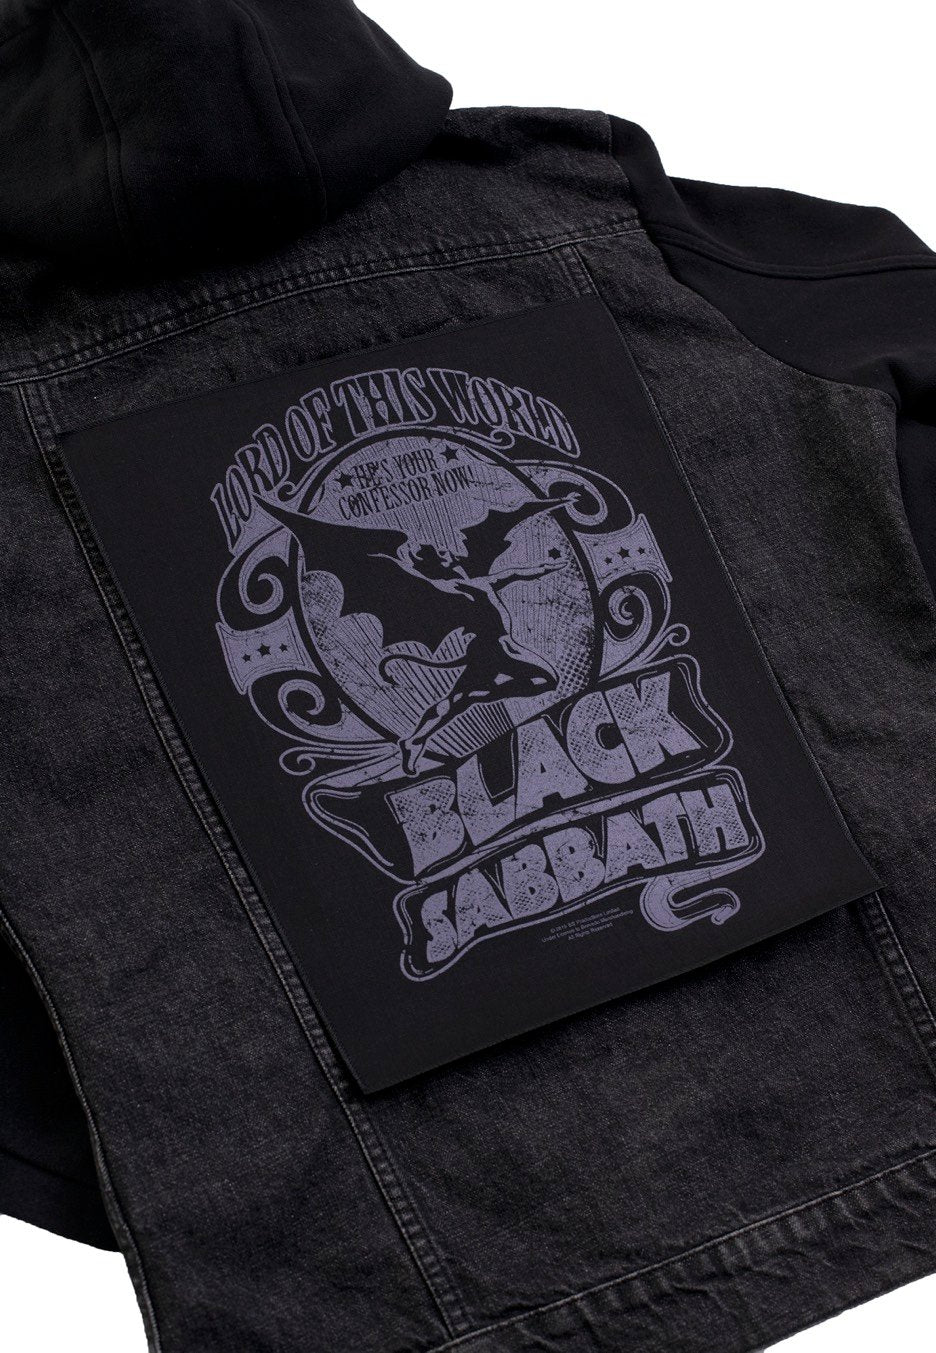 Black Sabbath - Lord Of This World - Backpatch